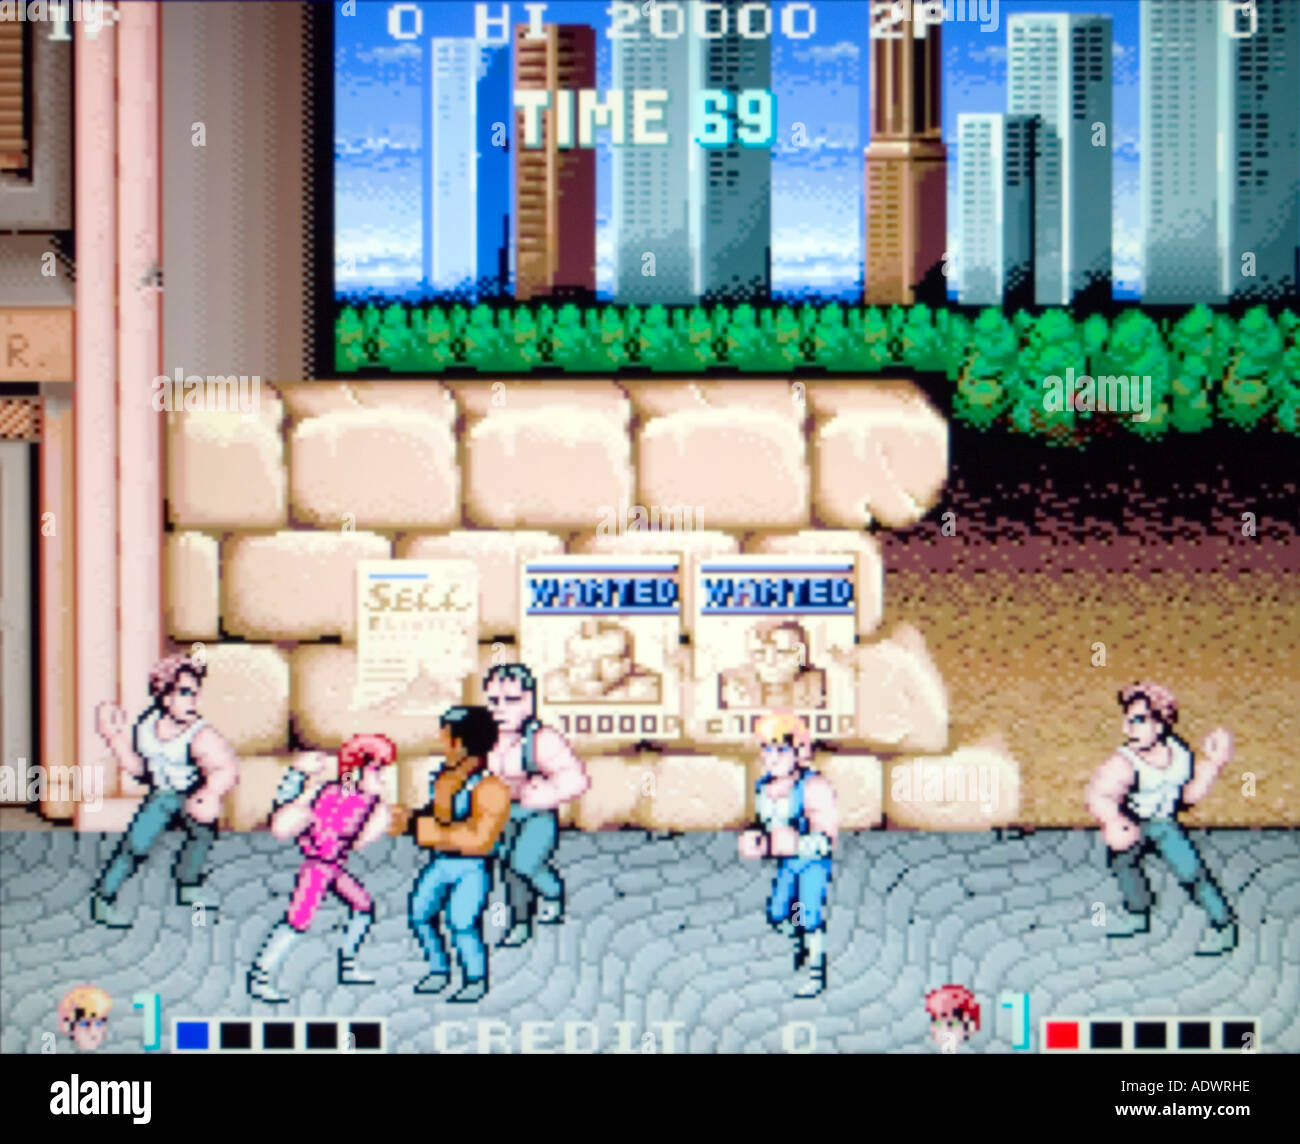 Double Dragon Techno Japan Corp 1987 vintage arcade videogame screenshot - EDITORIAL USE ONLY Stock Photo